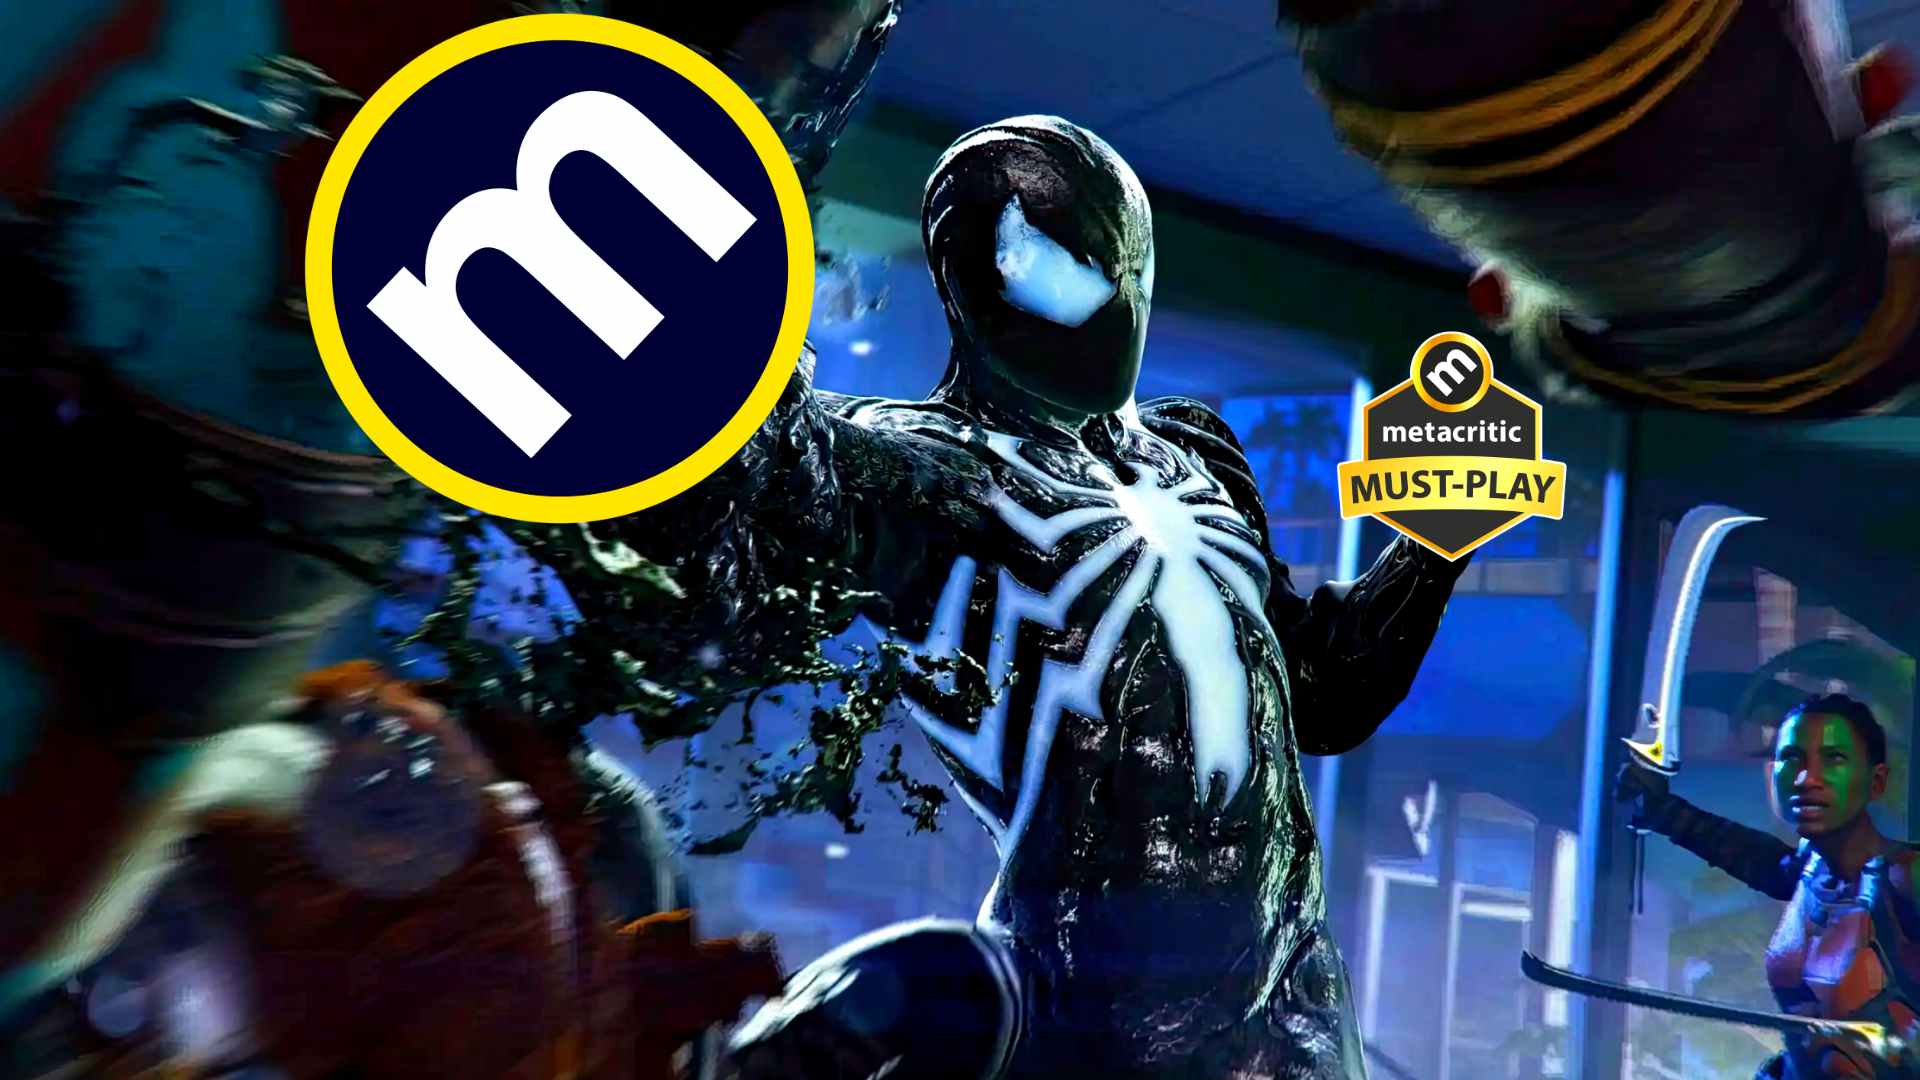 10 Best PS4 Games Of All Time (According to Metacritic)